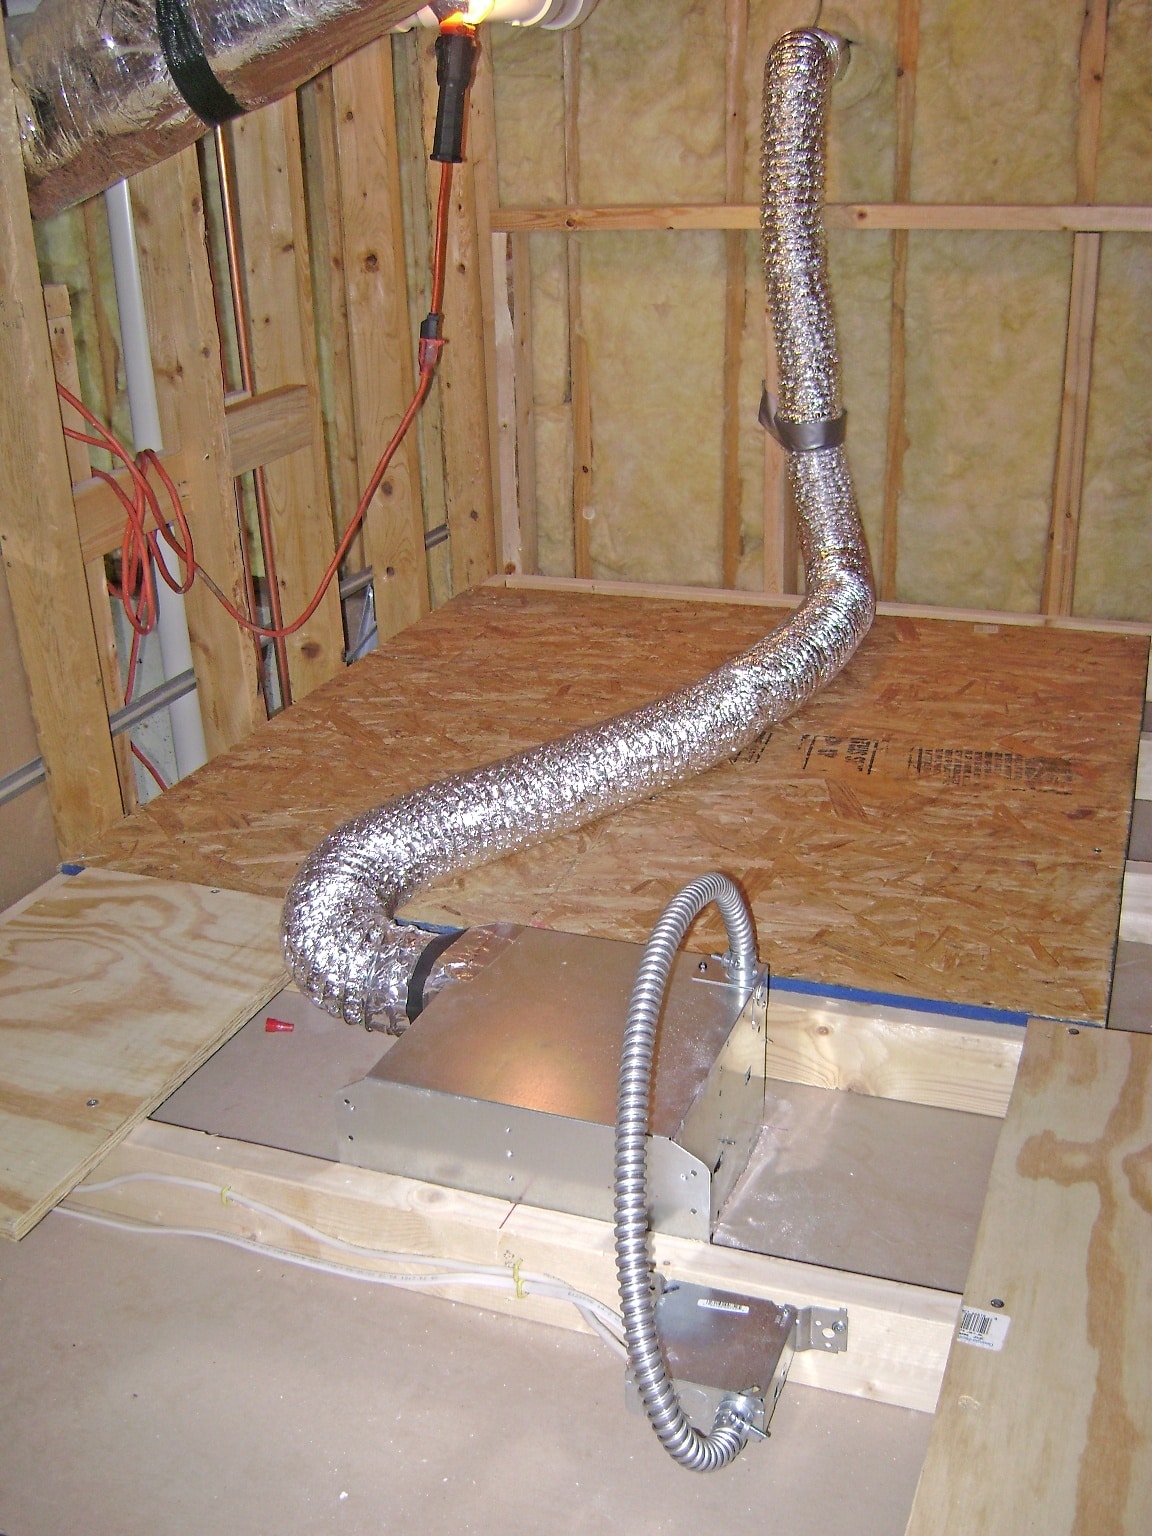 How to Finish a Basement Bathroom: Install and Wire the Exhaust Fan